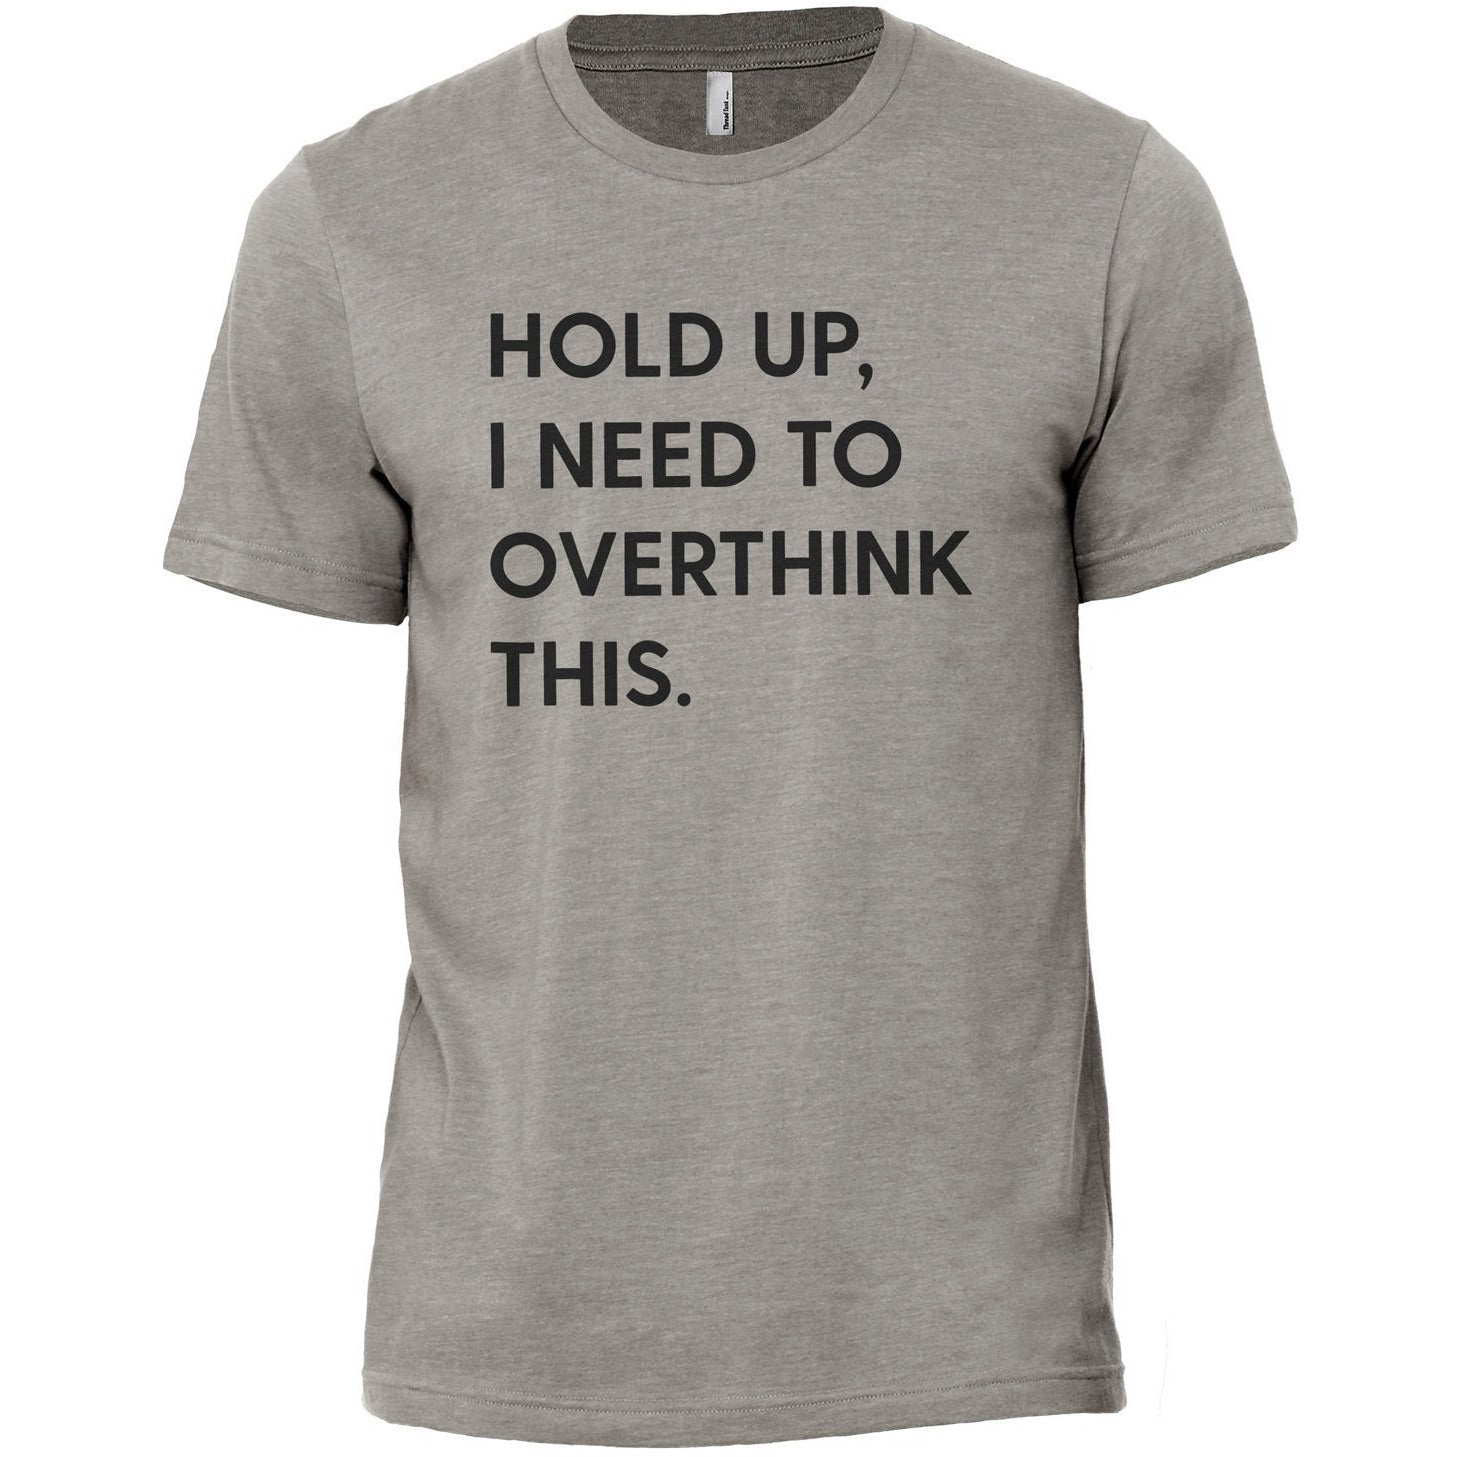 Hold Up, I Need To Rethink This Military Grey Printed Graphic Men's Crew T-Shirt Tee